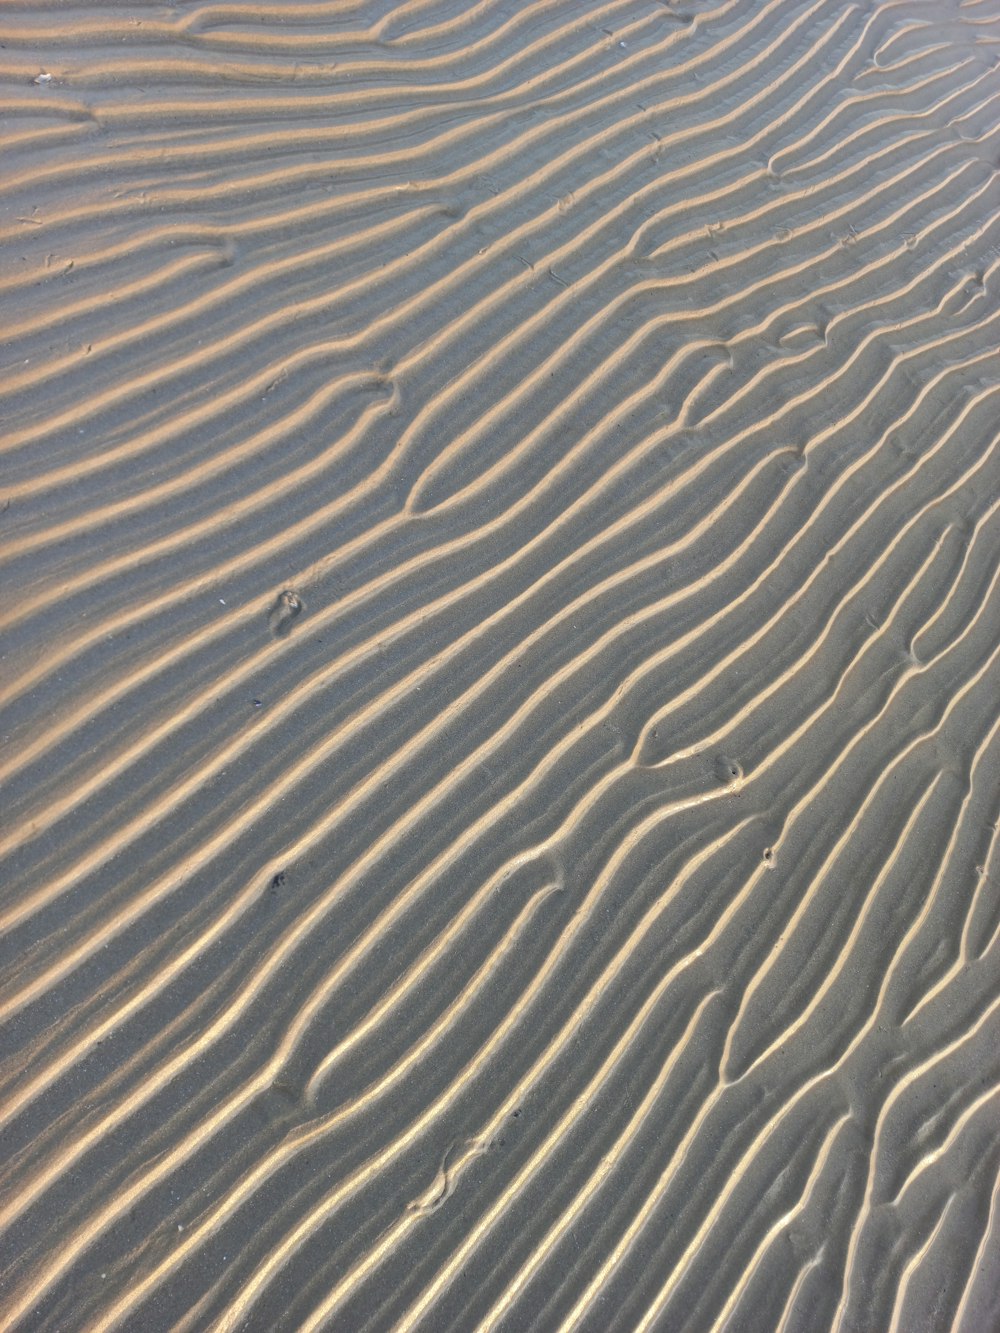 a sandy beach with lines in the sand